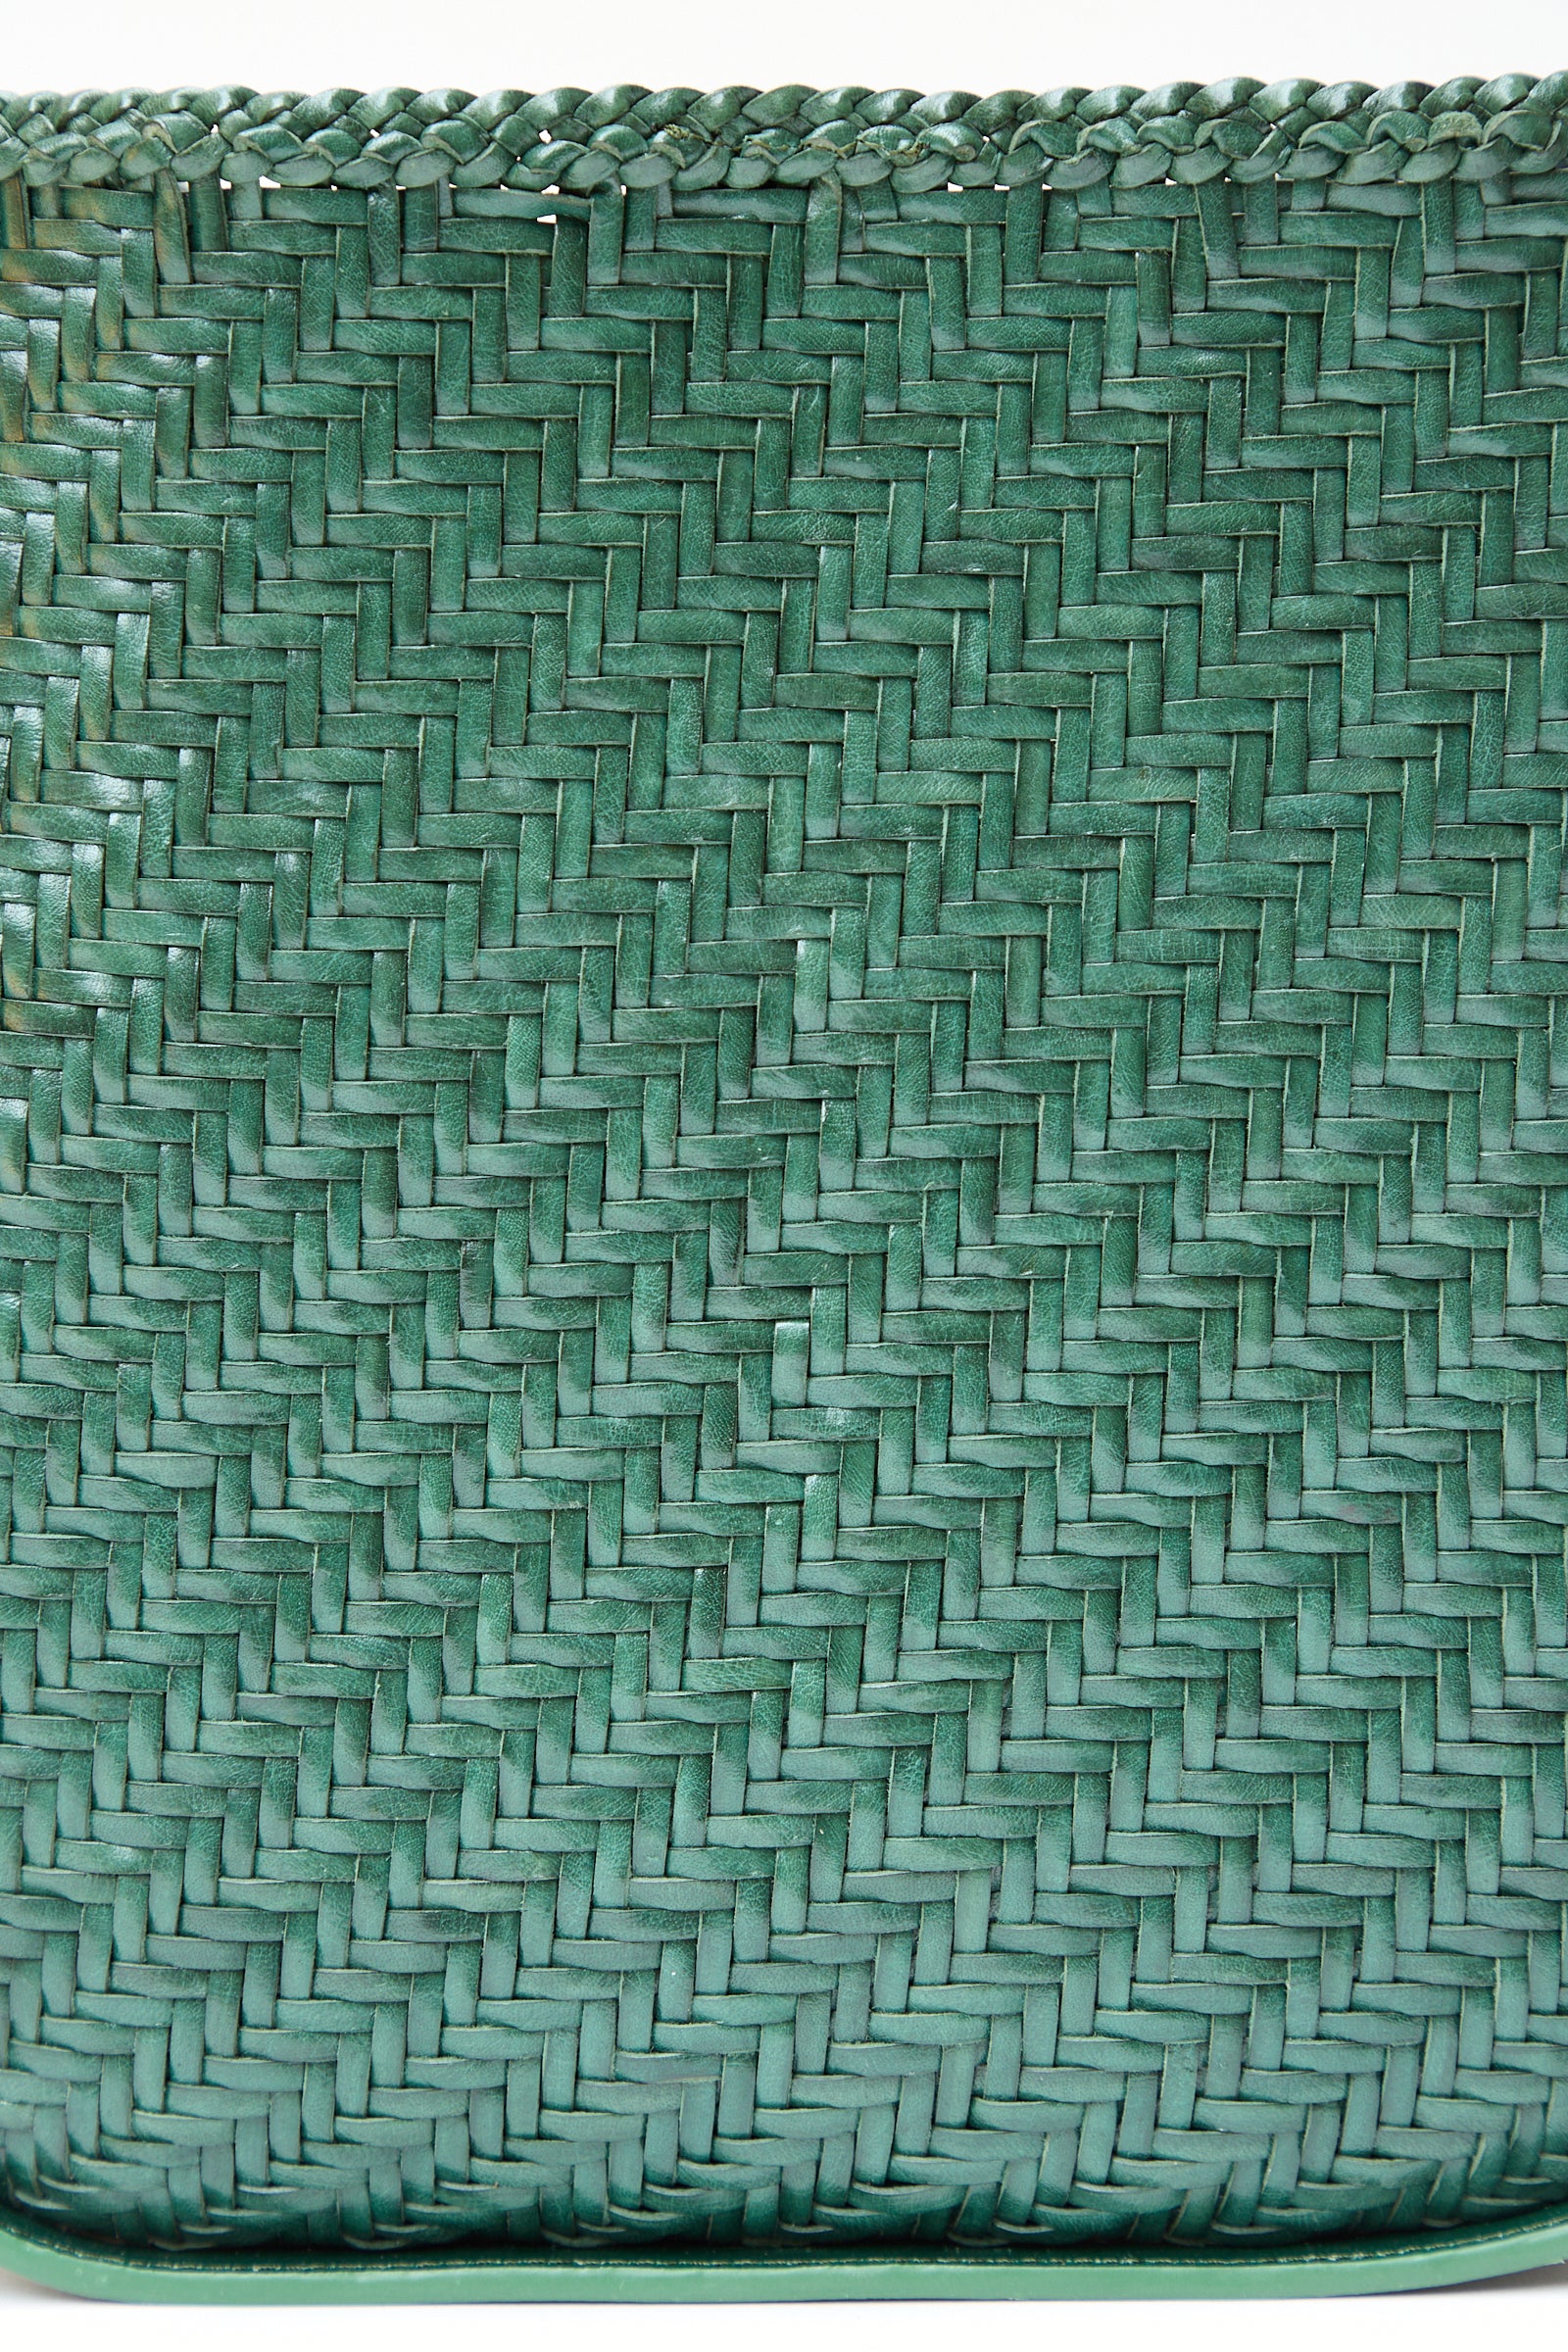 Close-up of a Wanaka in Forest leather basket texture by Dragon Diffusion, showing detailed interlacing of dyed fibers.